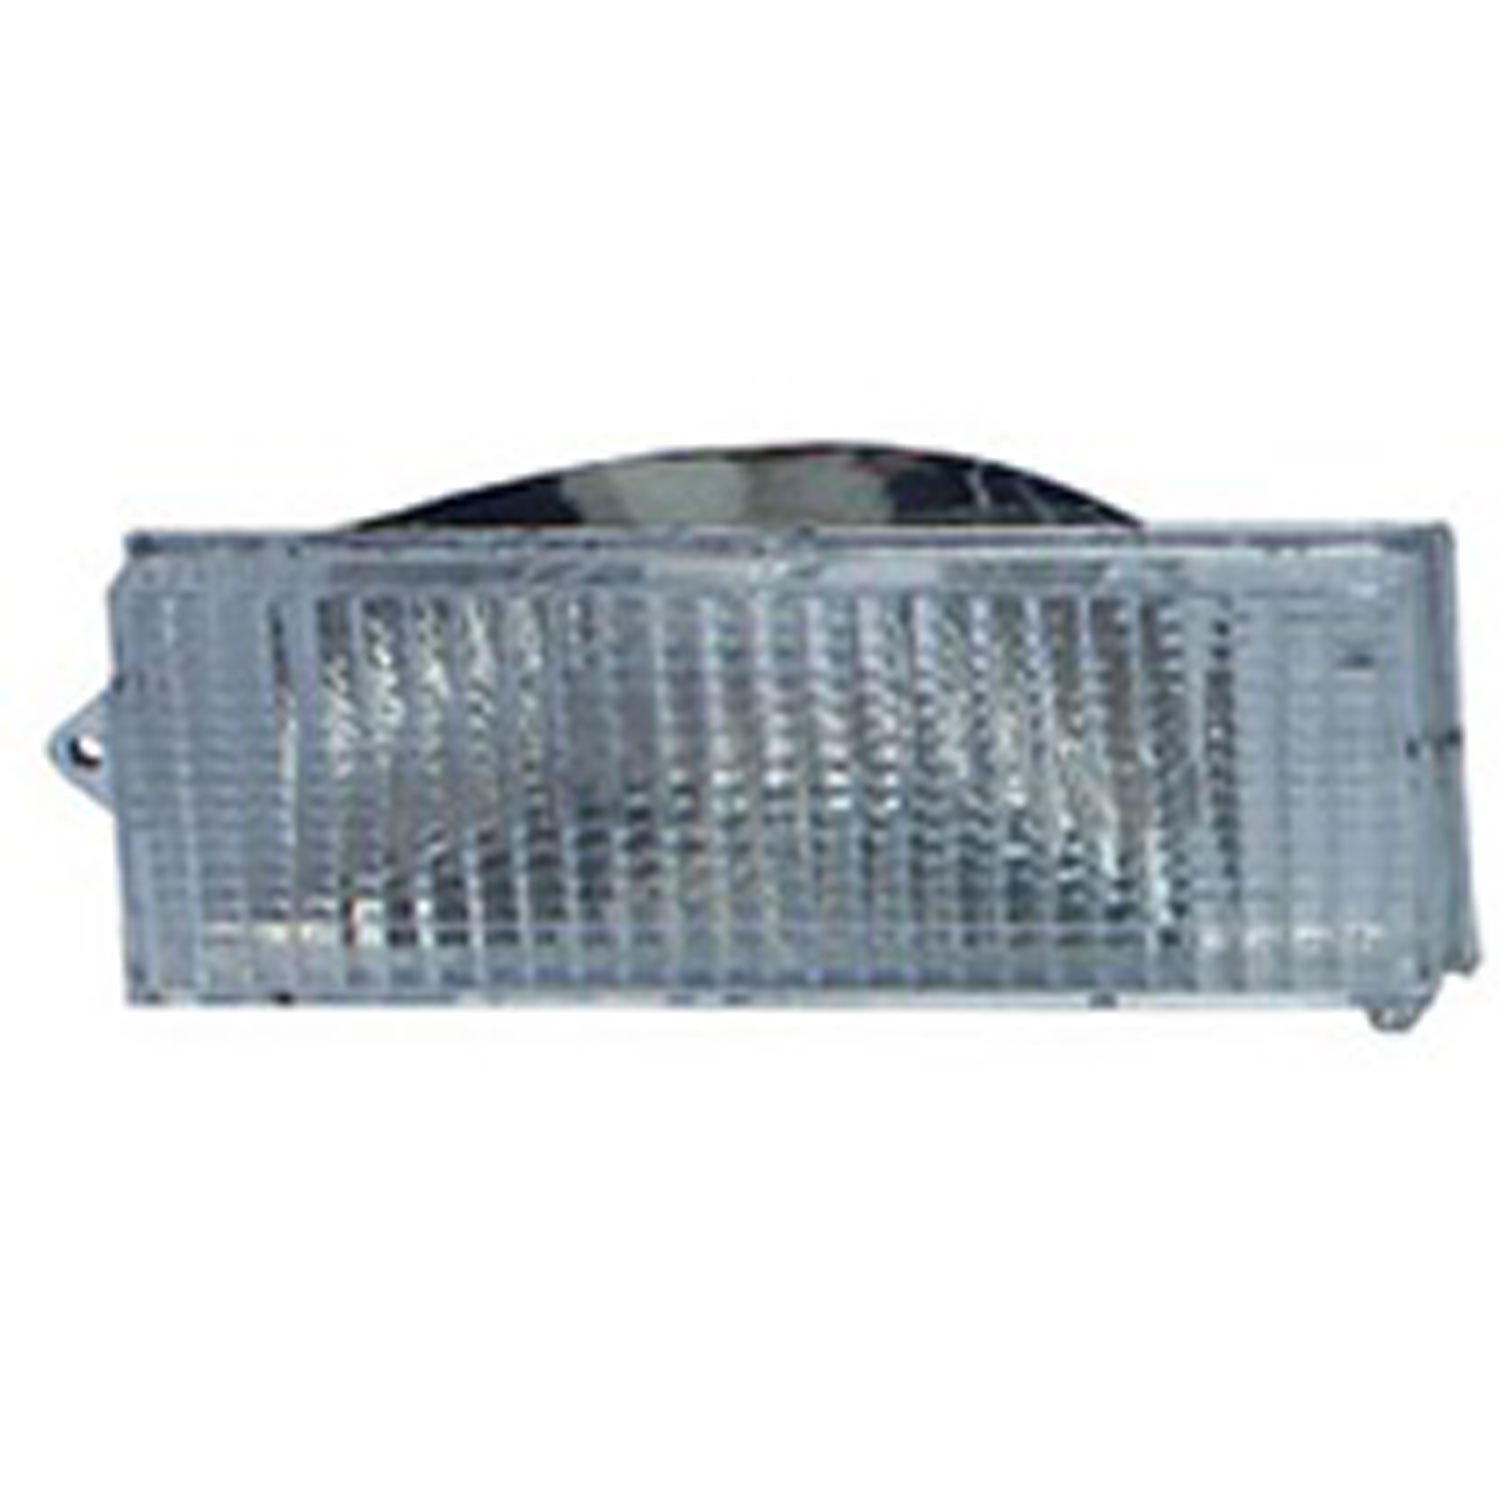 Replacement parking lamp from Omix-ADA, Fits left side